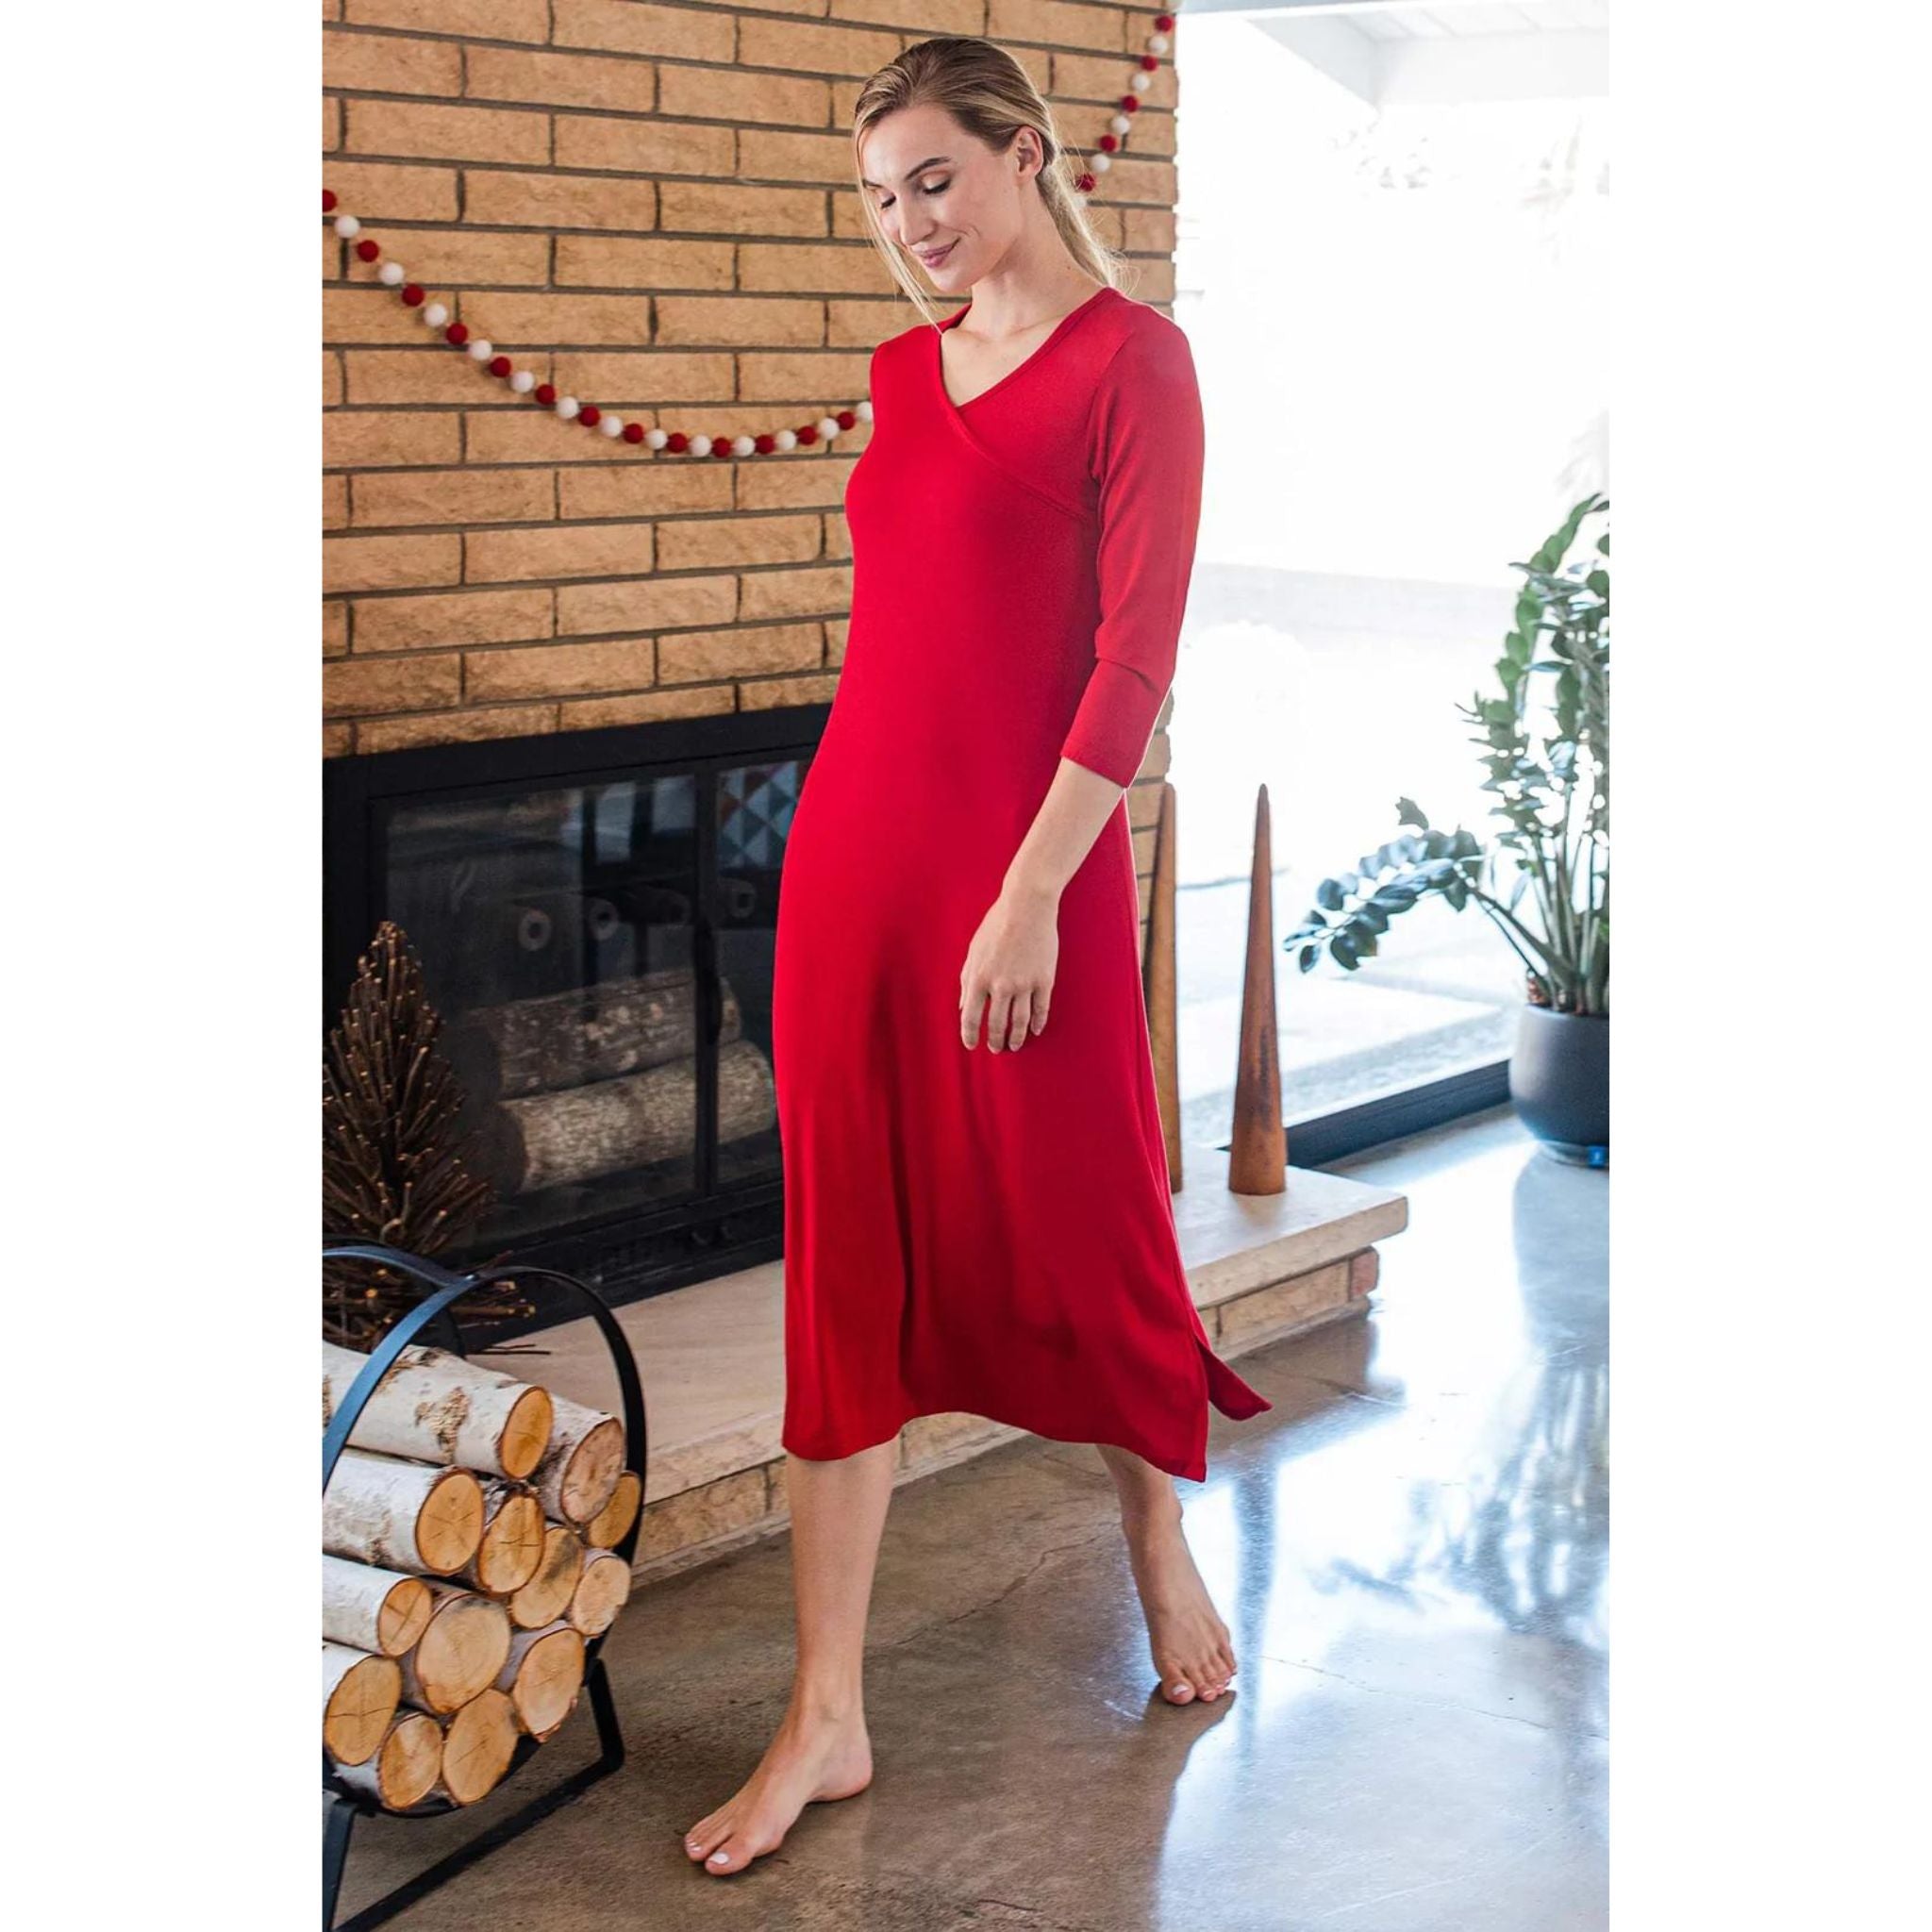 Pamper your skin while you sleep in the Haley Gown, which provides moderate coverage for cooler nights. Side slits, crossover front detail, 3/4 sleeves. Below knee hemline.  Like a second skin, Yala's organically grown bamboo viscose jersey provides incredible softness, breathability, and sun protection. 95% Viscose from Bamboo | 5% Spandex Sewn Where Sourced on Small Sewing Floors Low Impact Dyes Oeko-Tex 100 Certified Naturally up to UPF 50 (Ultraviolet Protection Factor)